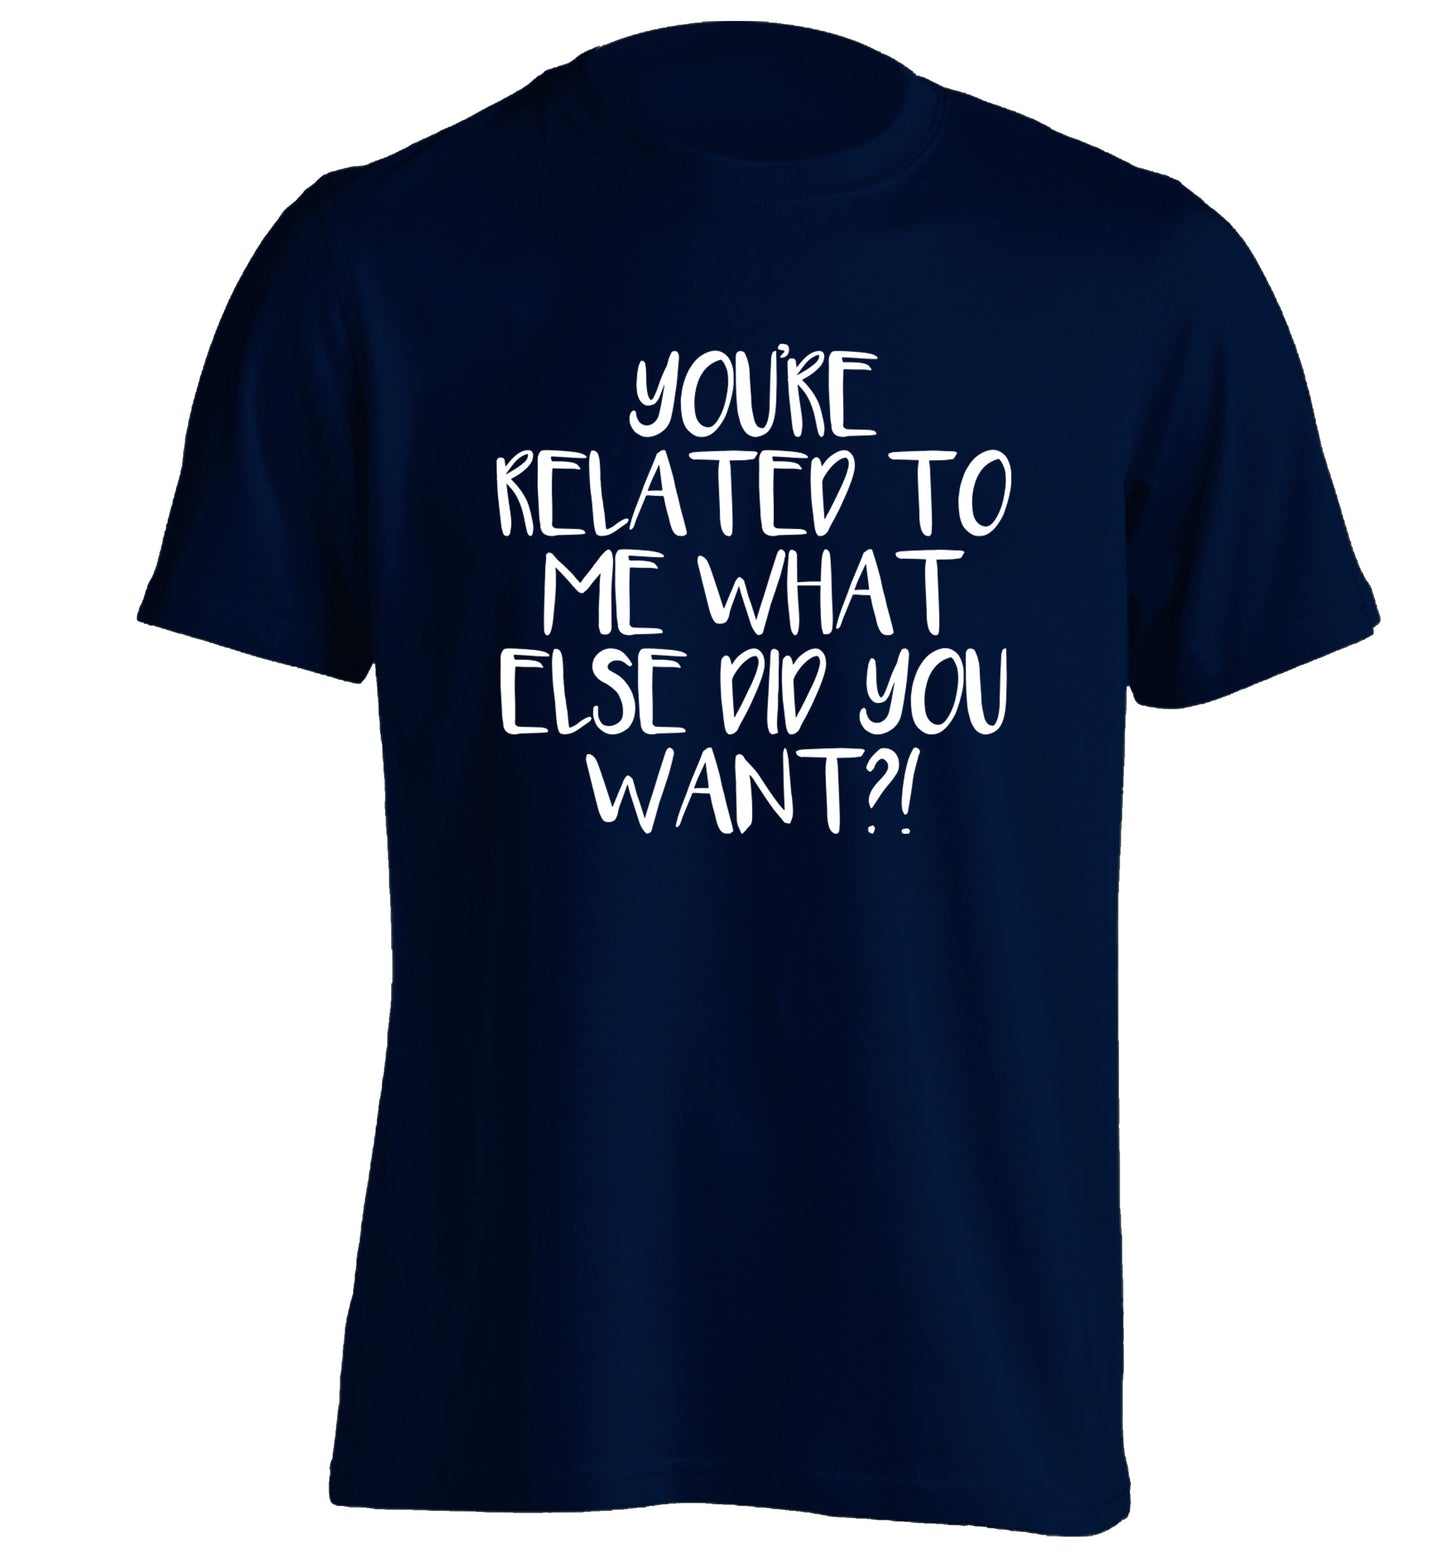 You're related to me what more do you want? adults unisex navy Tshirt 2XL